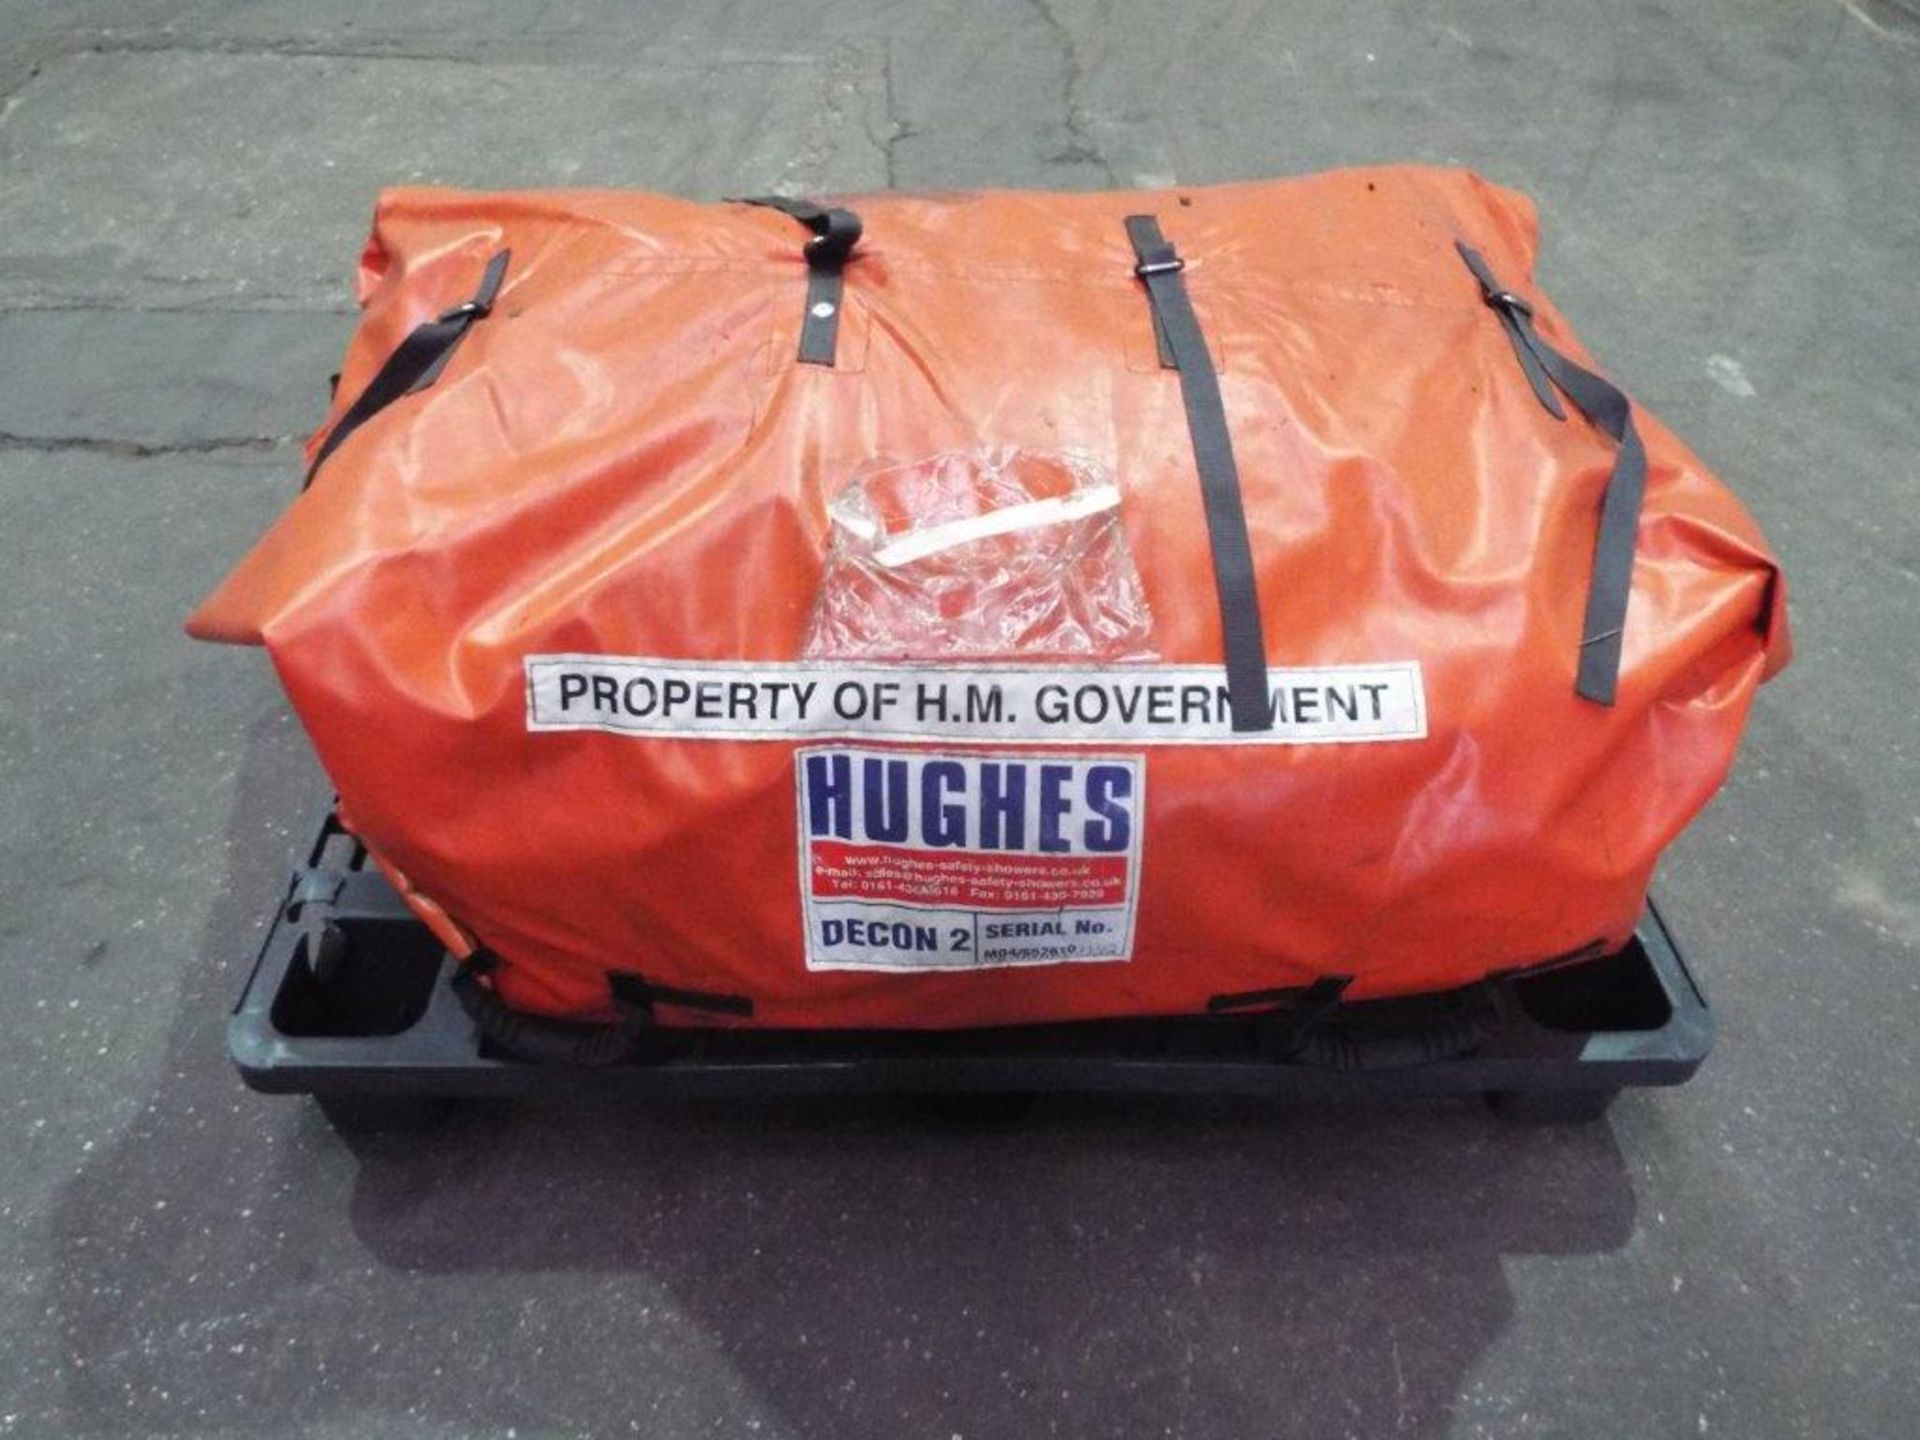 Hughes Decon 2 Inflatable Decontamination Shower Unit with Flooring - Image 11 of 13